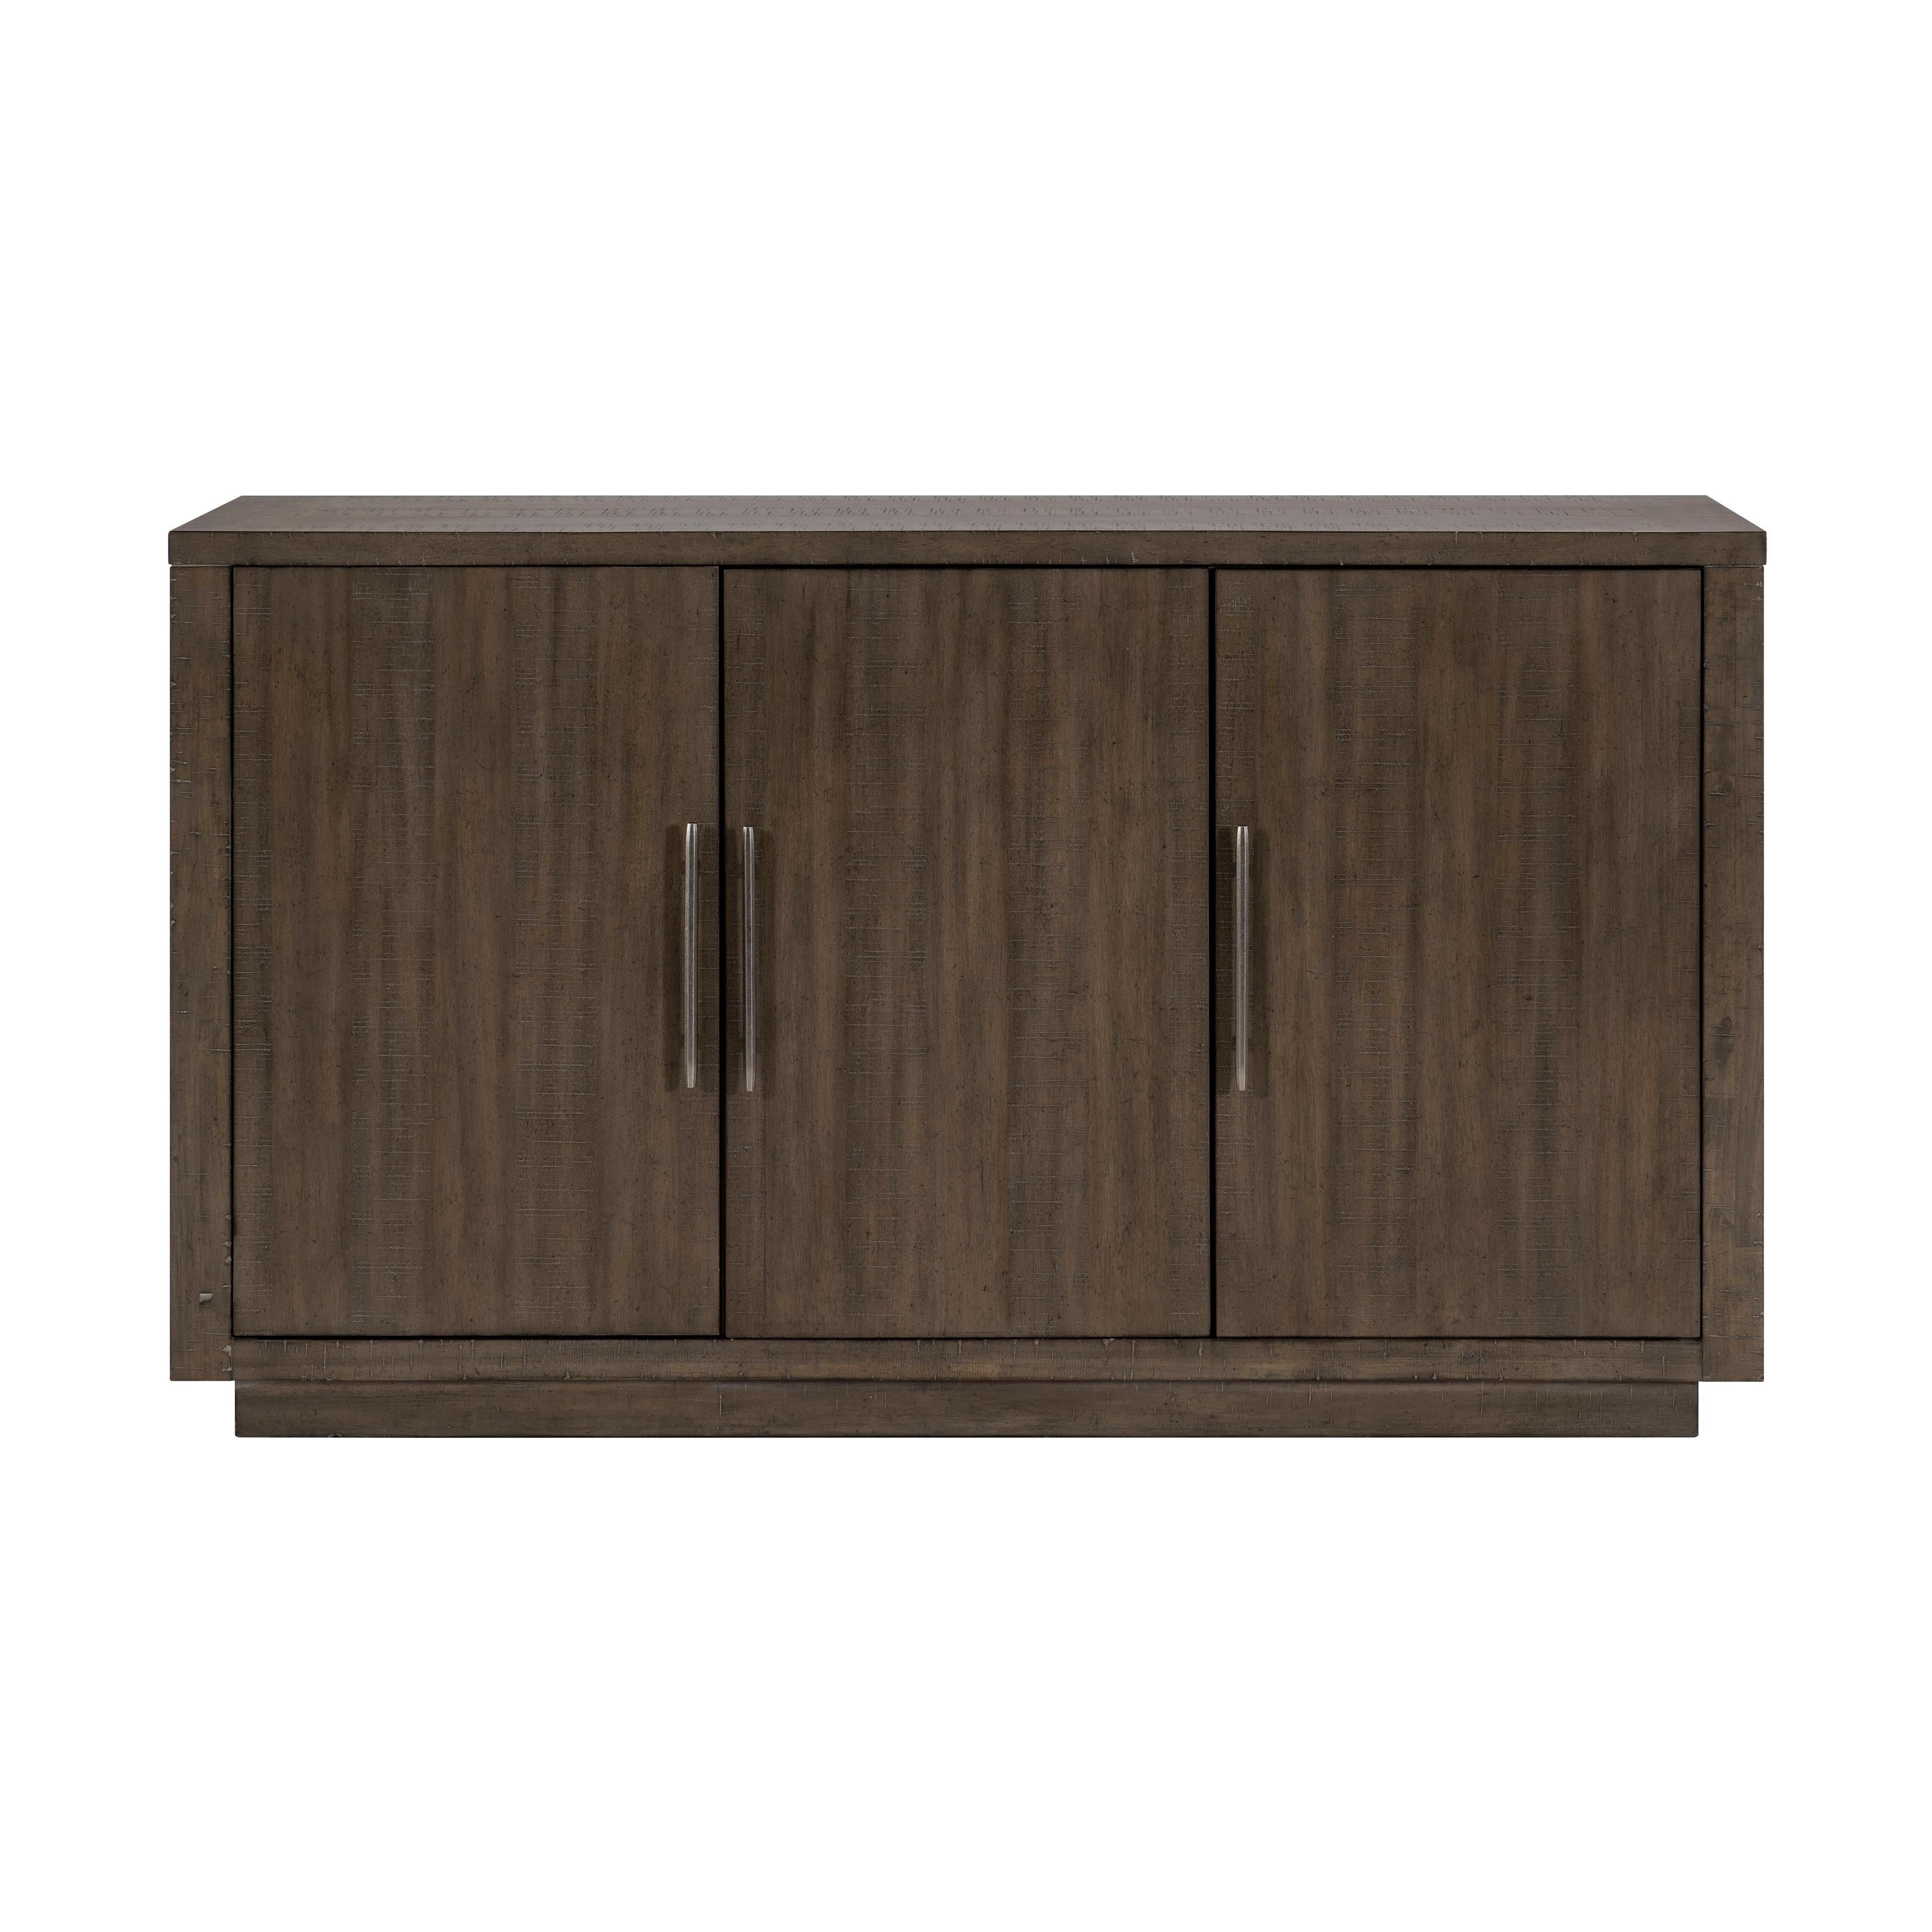 Contemporary Server Brookings Collection Server 5764-40-S 5764-40-S in Brown 